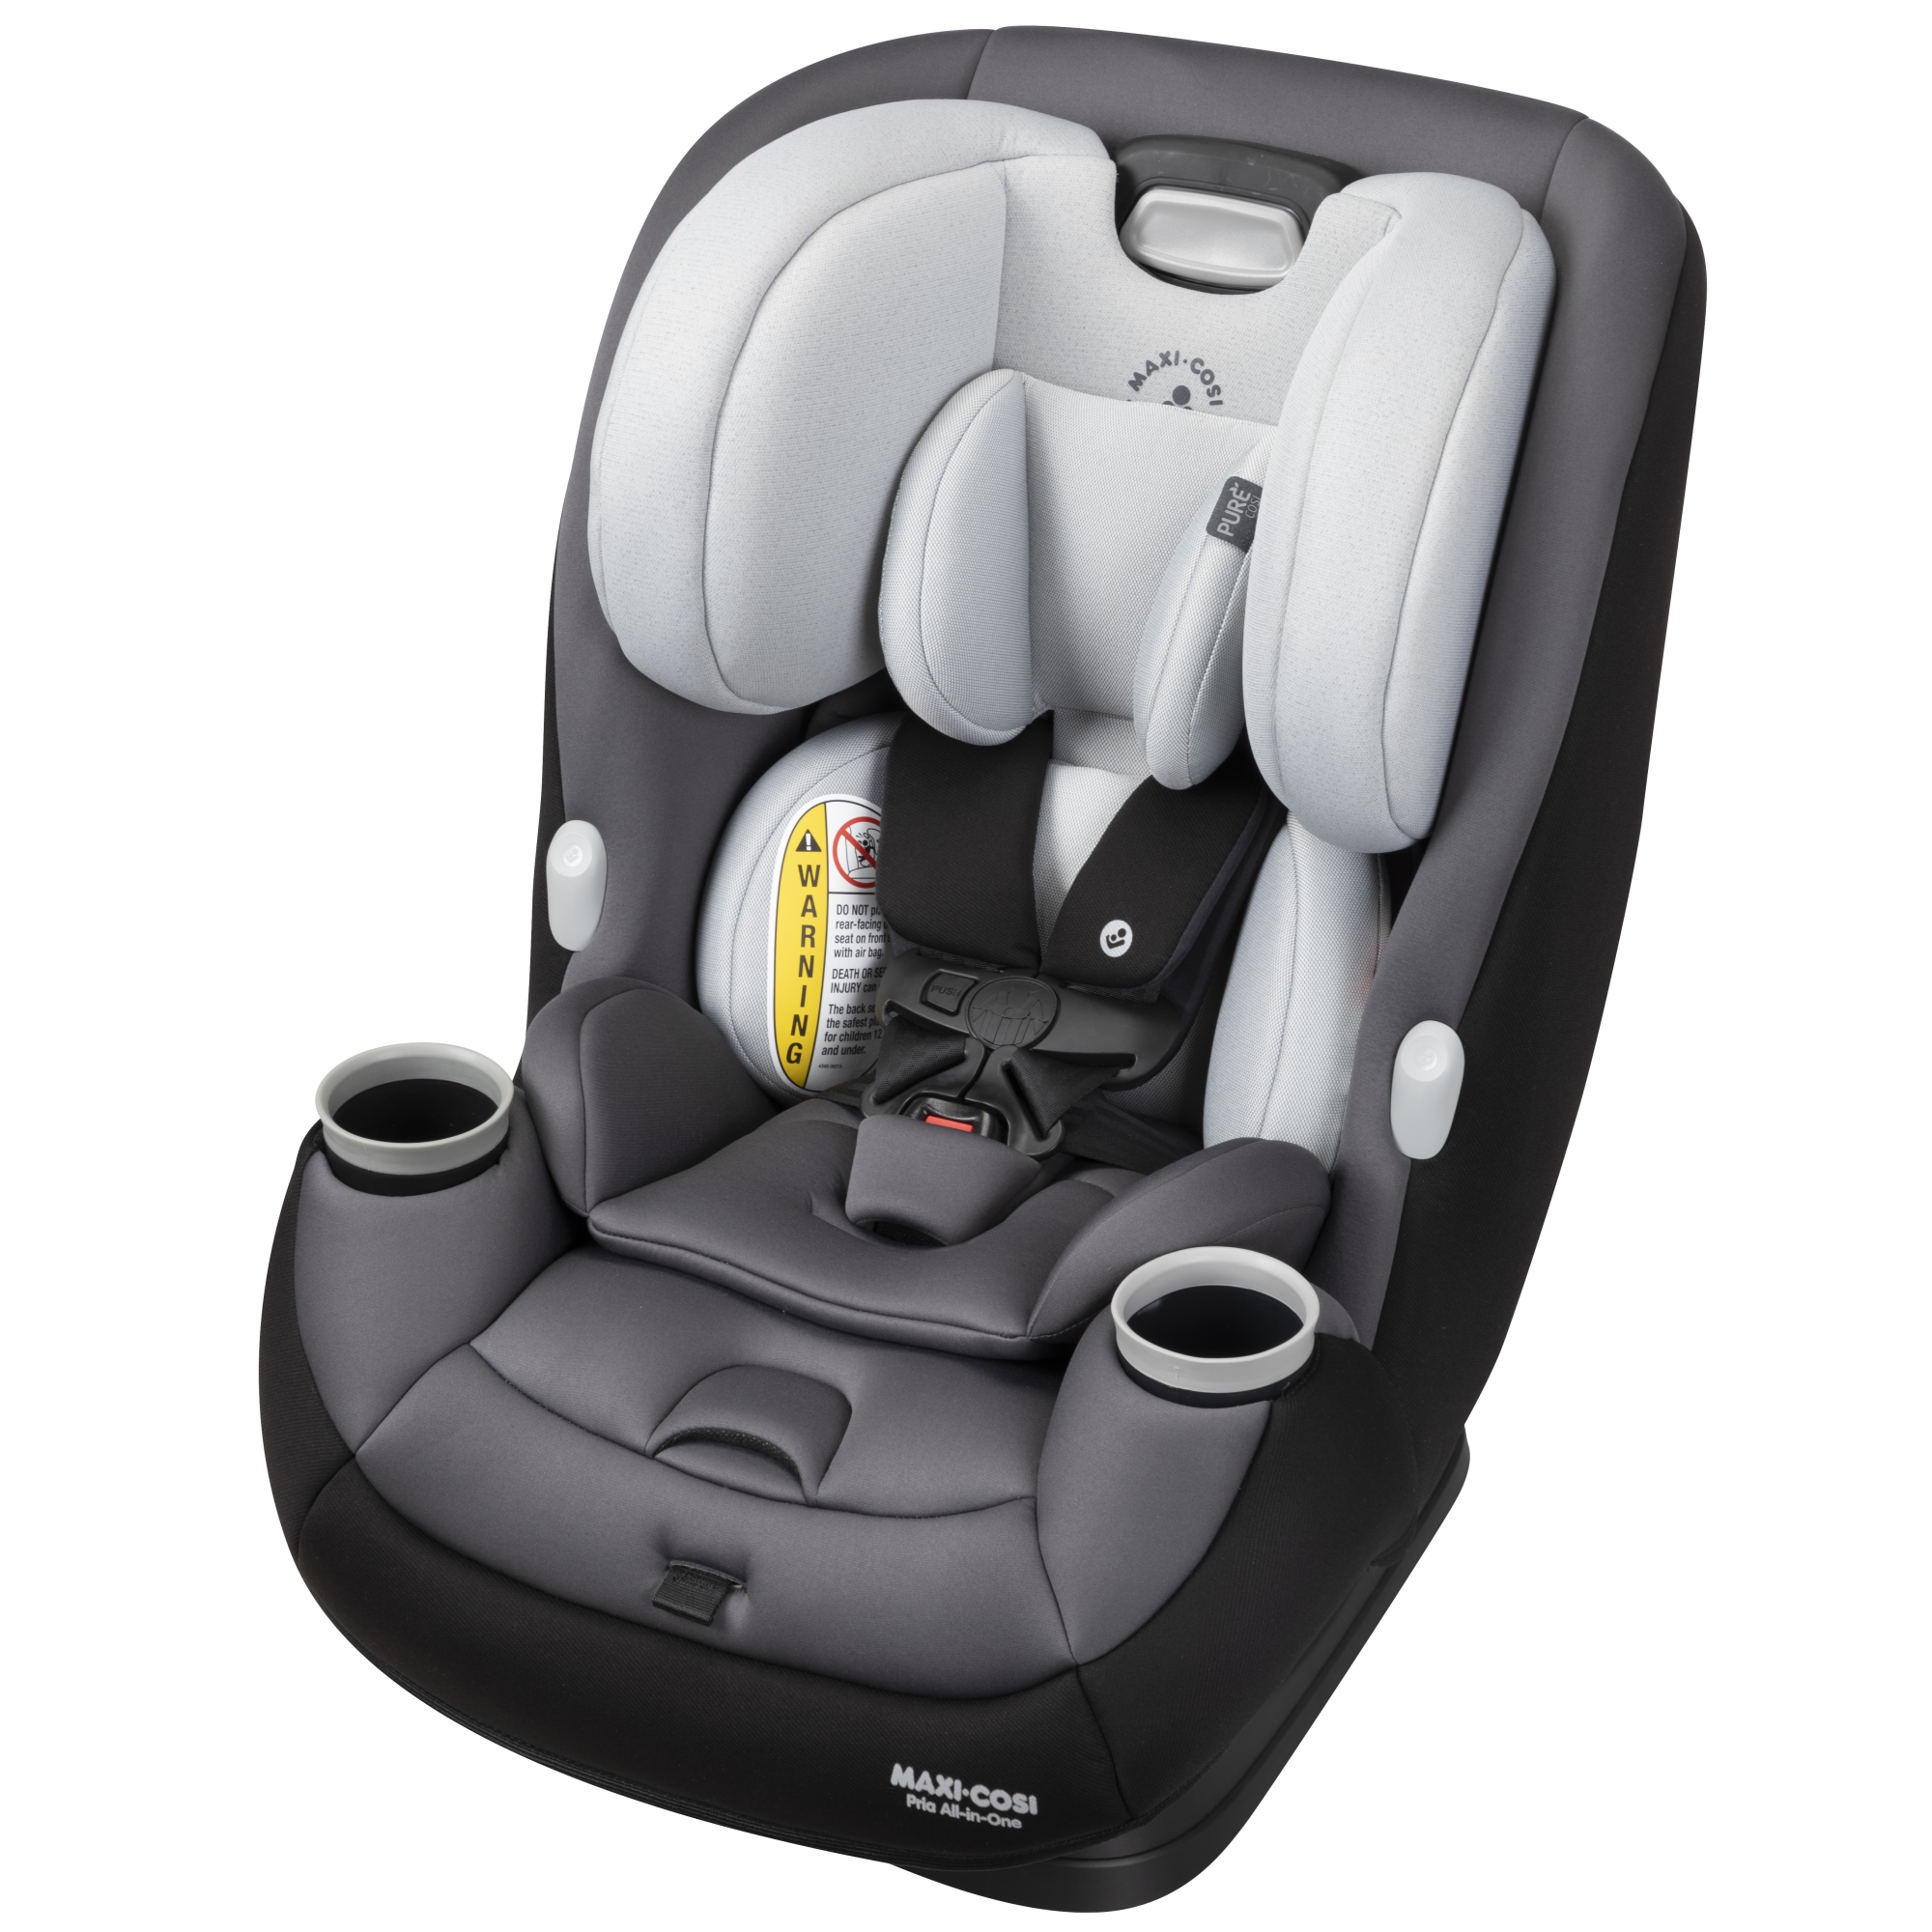 Pria™ All-in-One Convertible Car Seat - Blackened Pearl